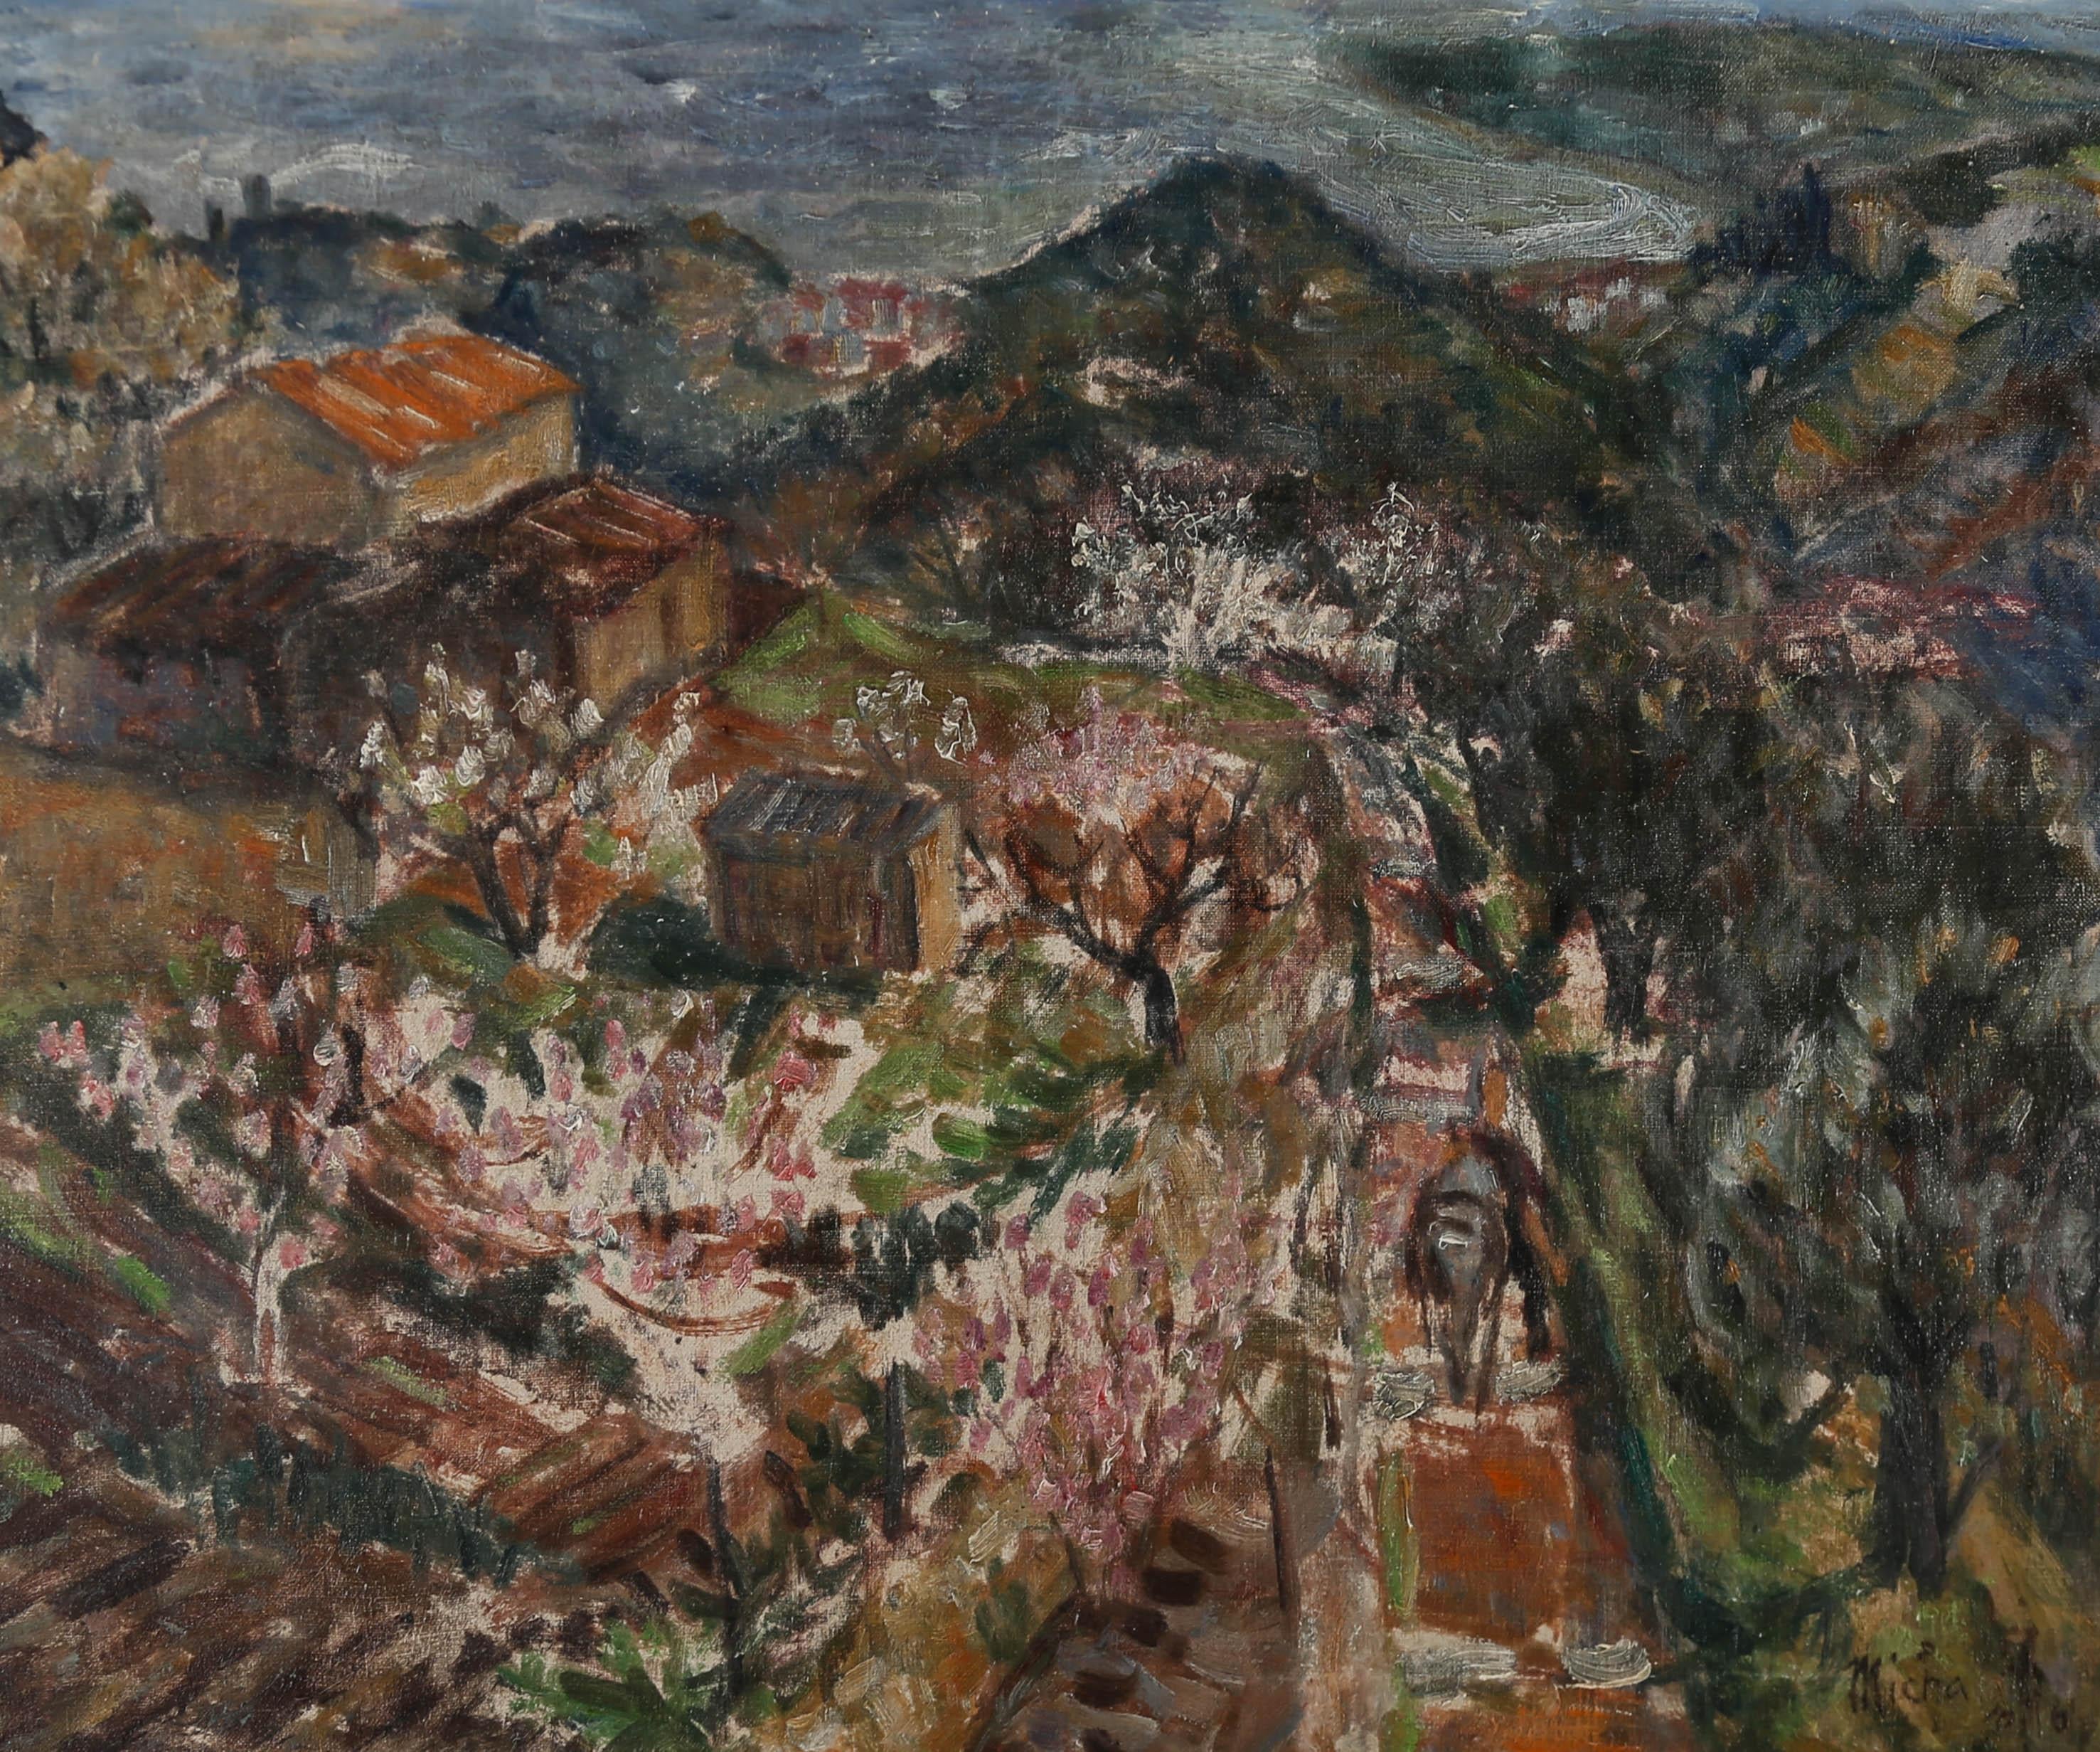 A fine early 20th Century Belgian Impressionist landscape showing the rural hills of the Belgian countryside with blossom trees and farm buildings. The artist's use of darker, more muted tones in the distant hills adds gravity and highlights the